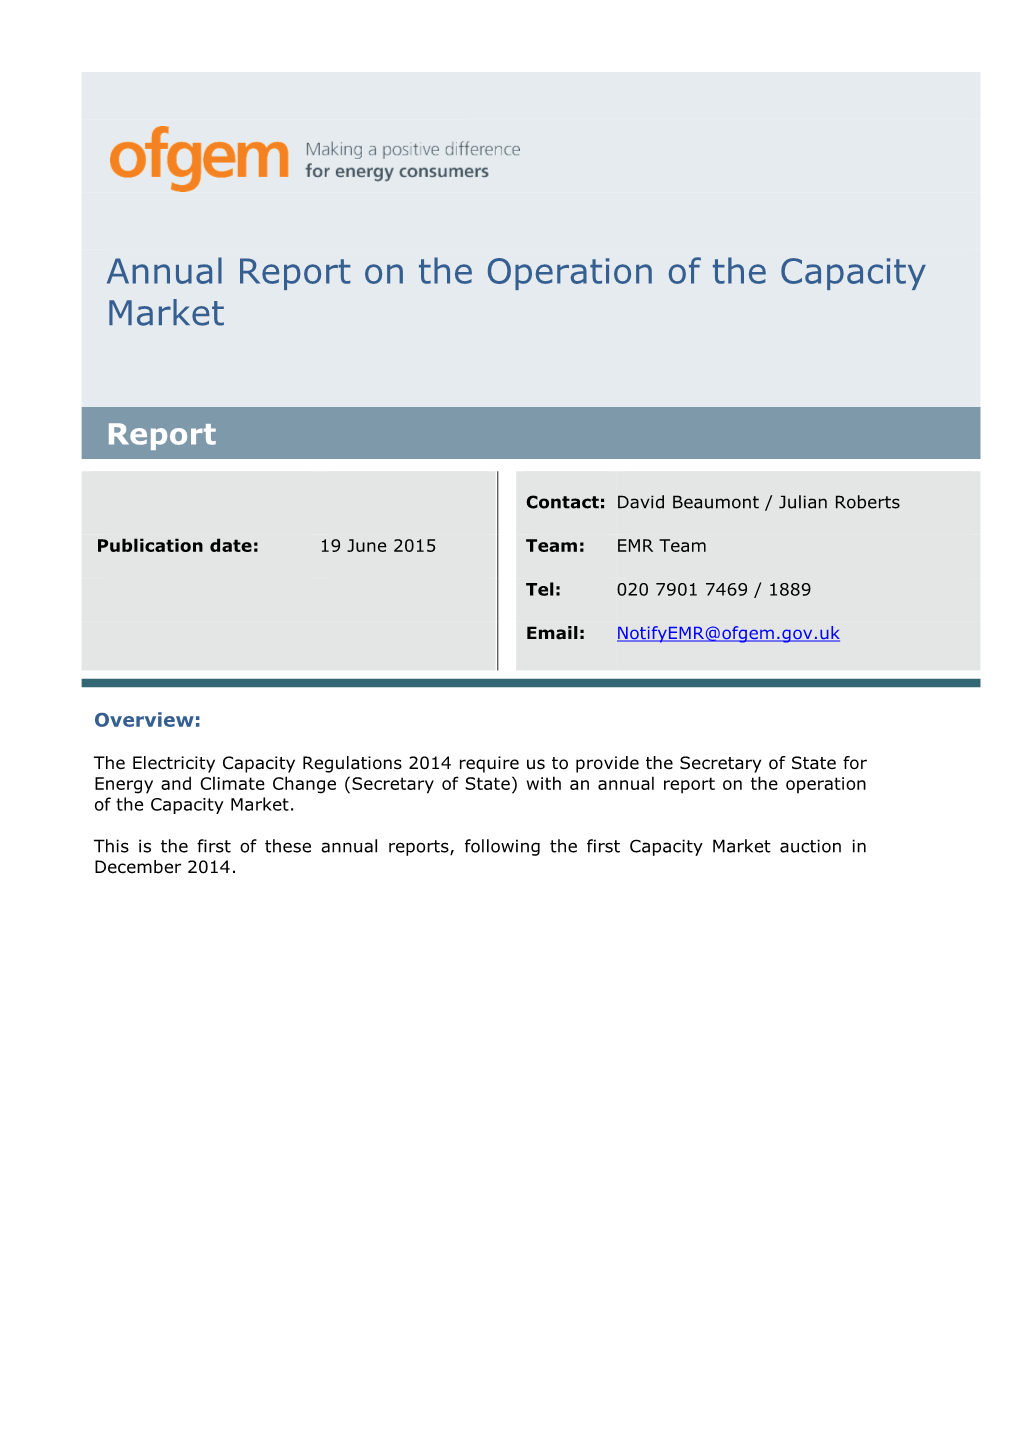 Annual Report on the Operation of the Capacity Market